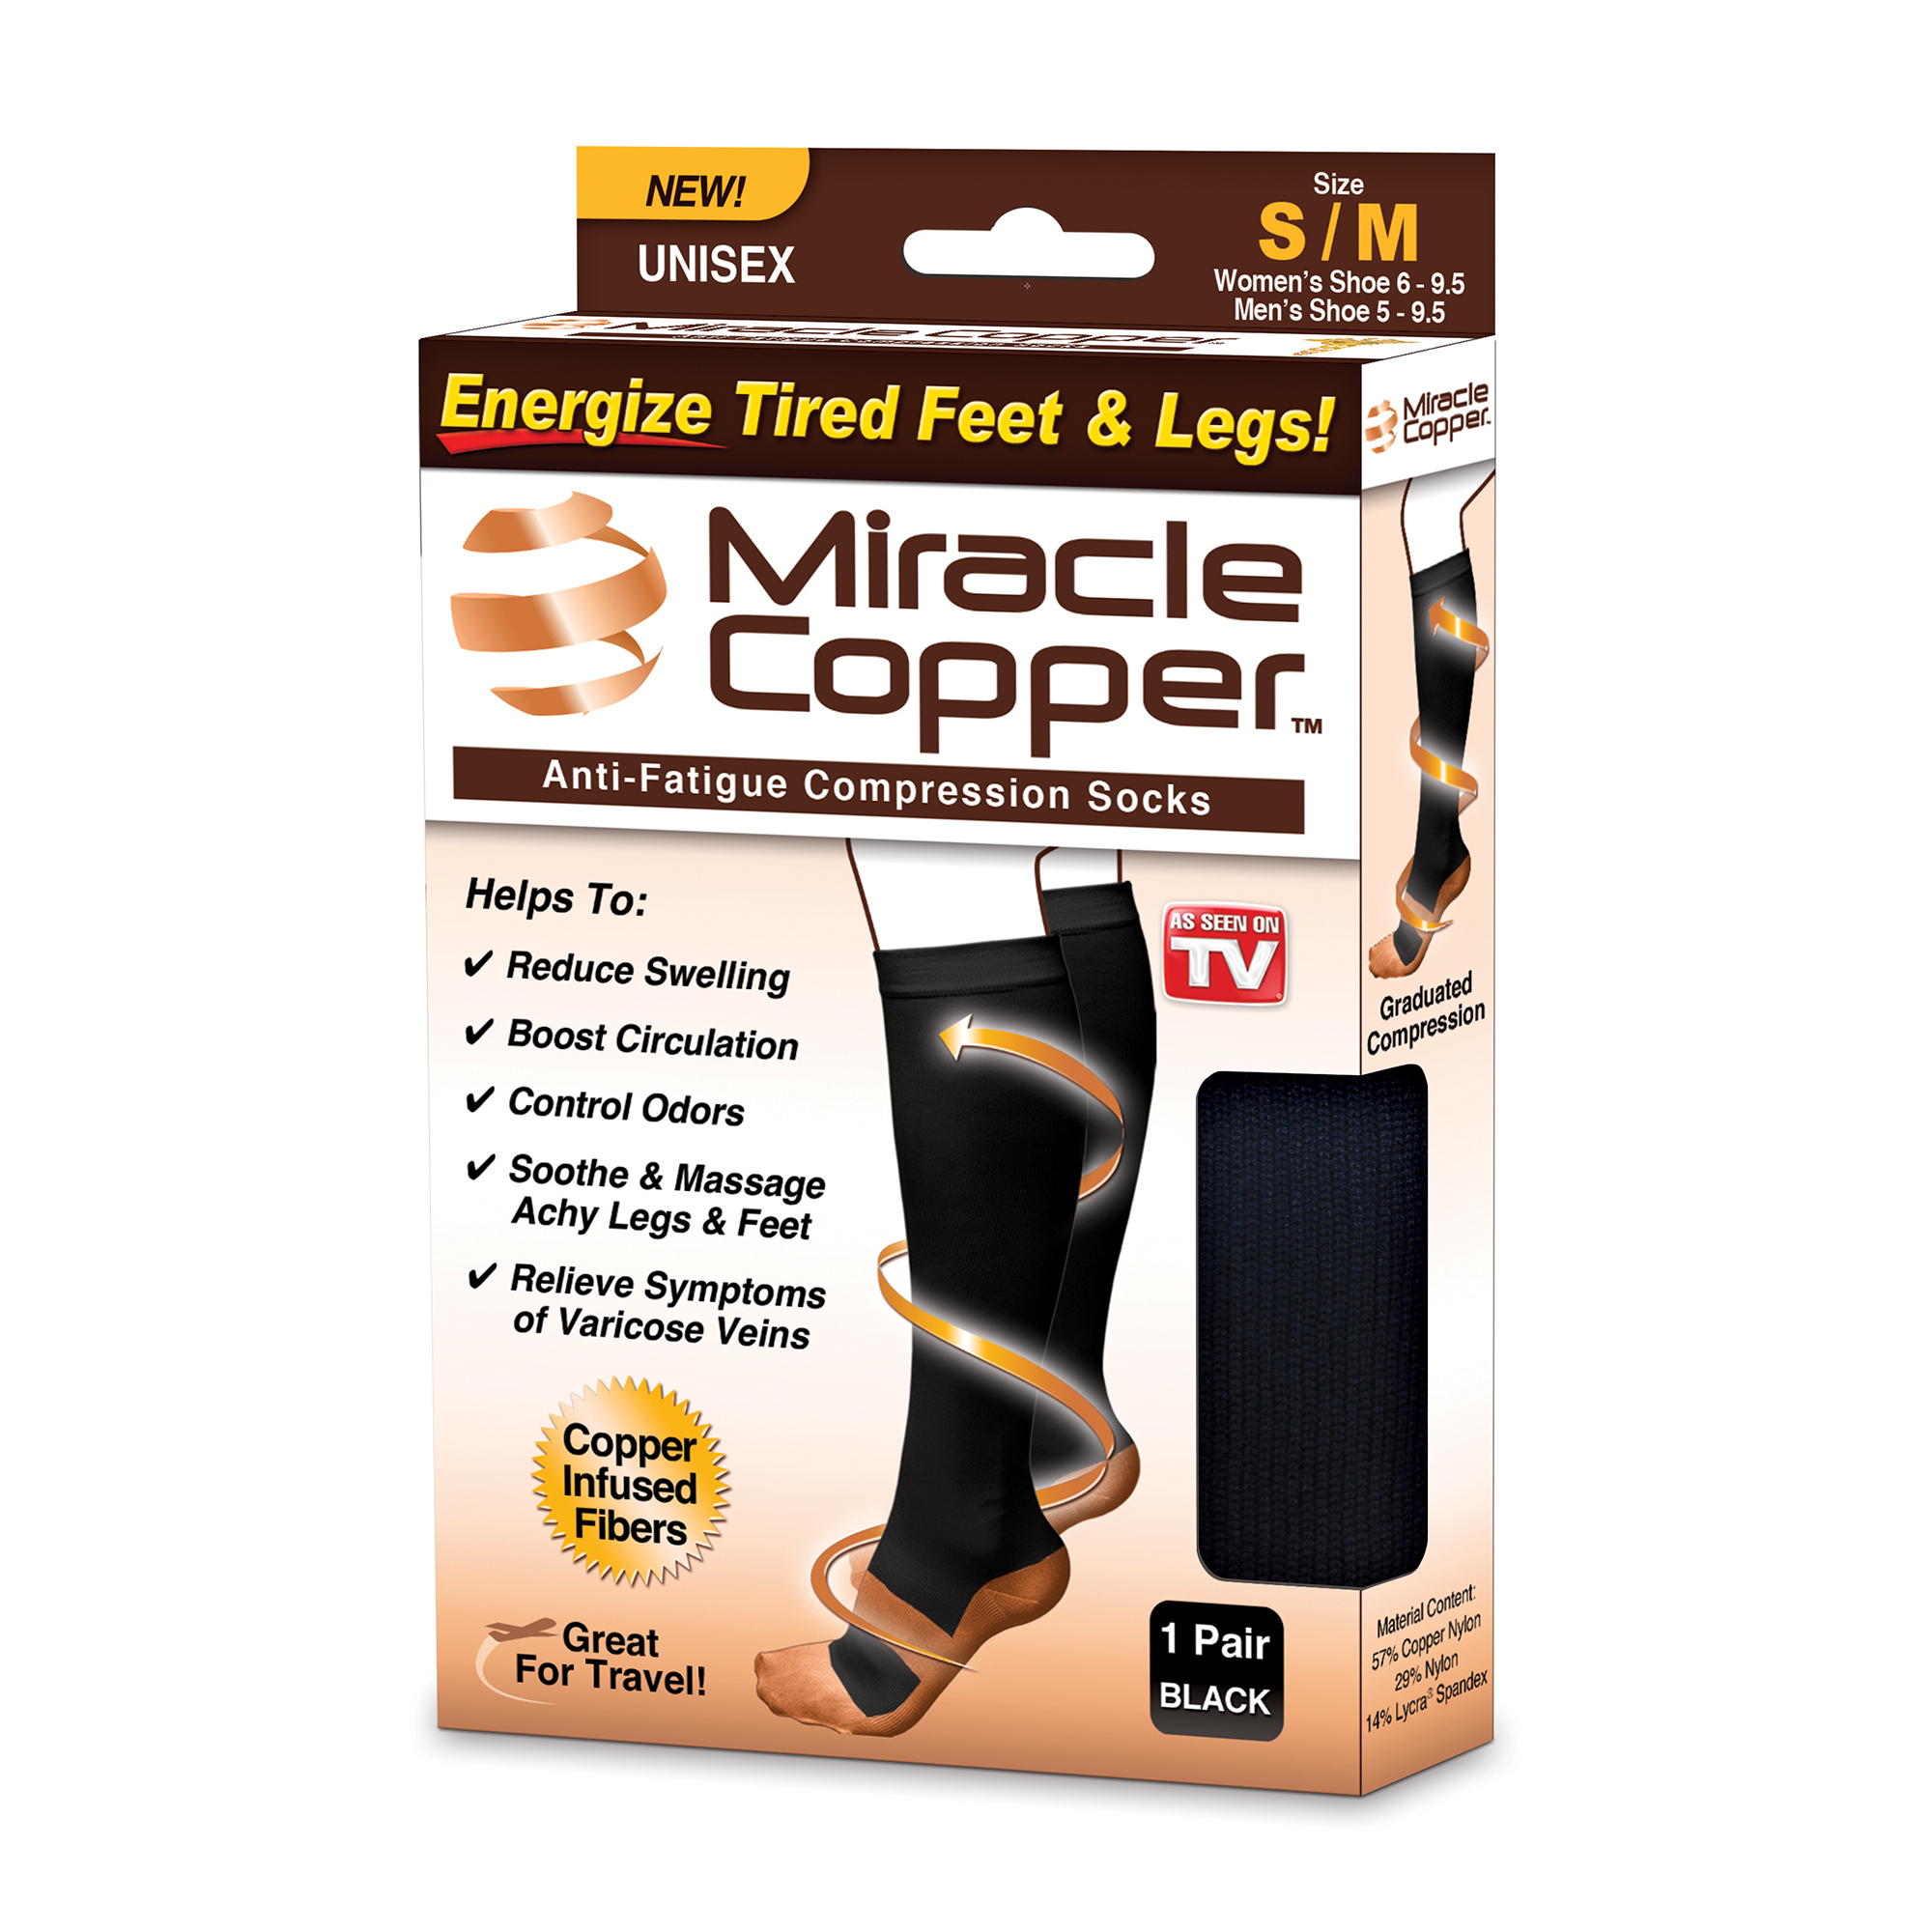 Miracle Copper Anti-Fatigue Copper Infused Compression Socks, Choose Your Size Unisex, As Seen on TV - image 1 of 6